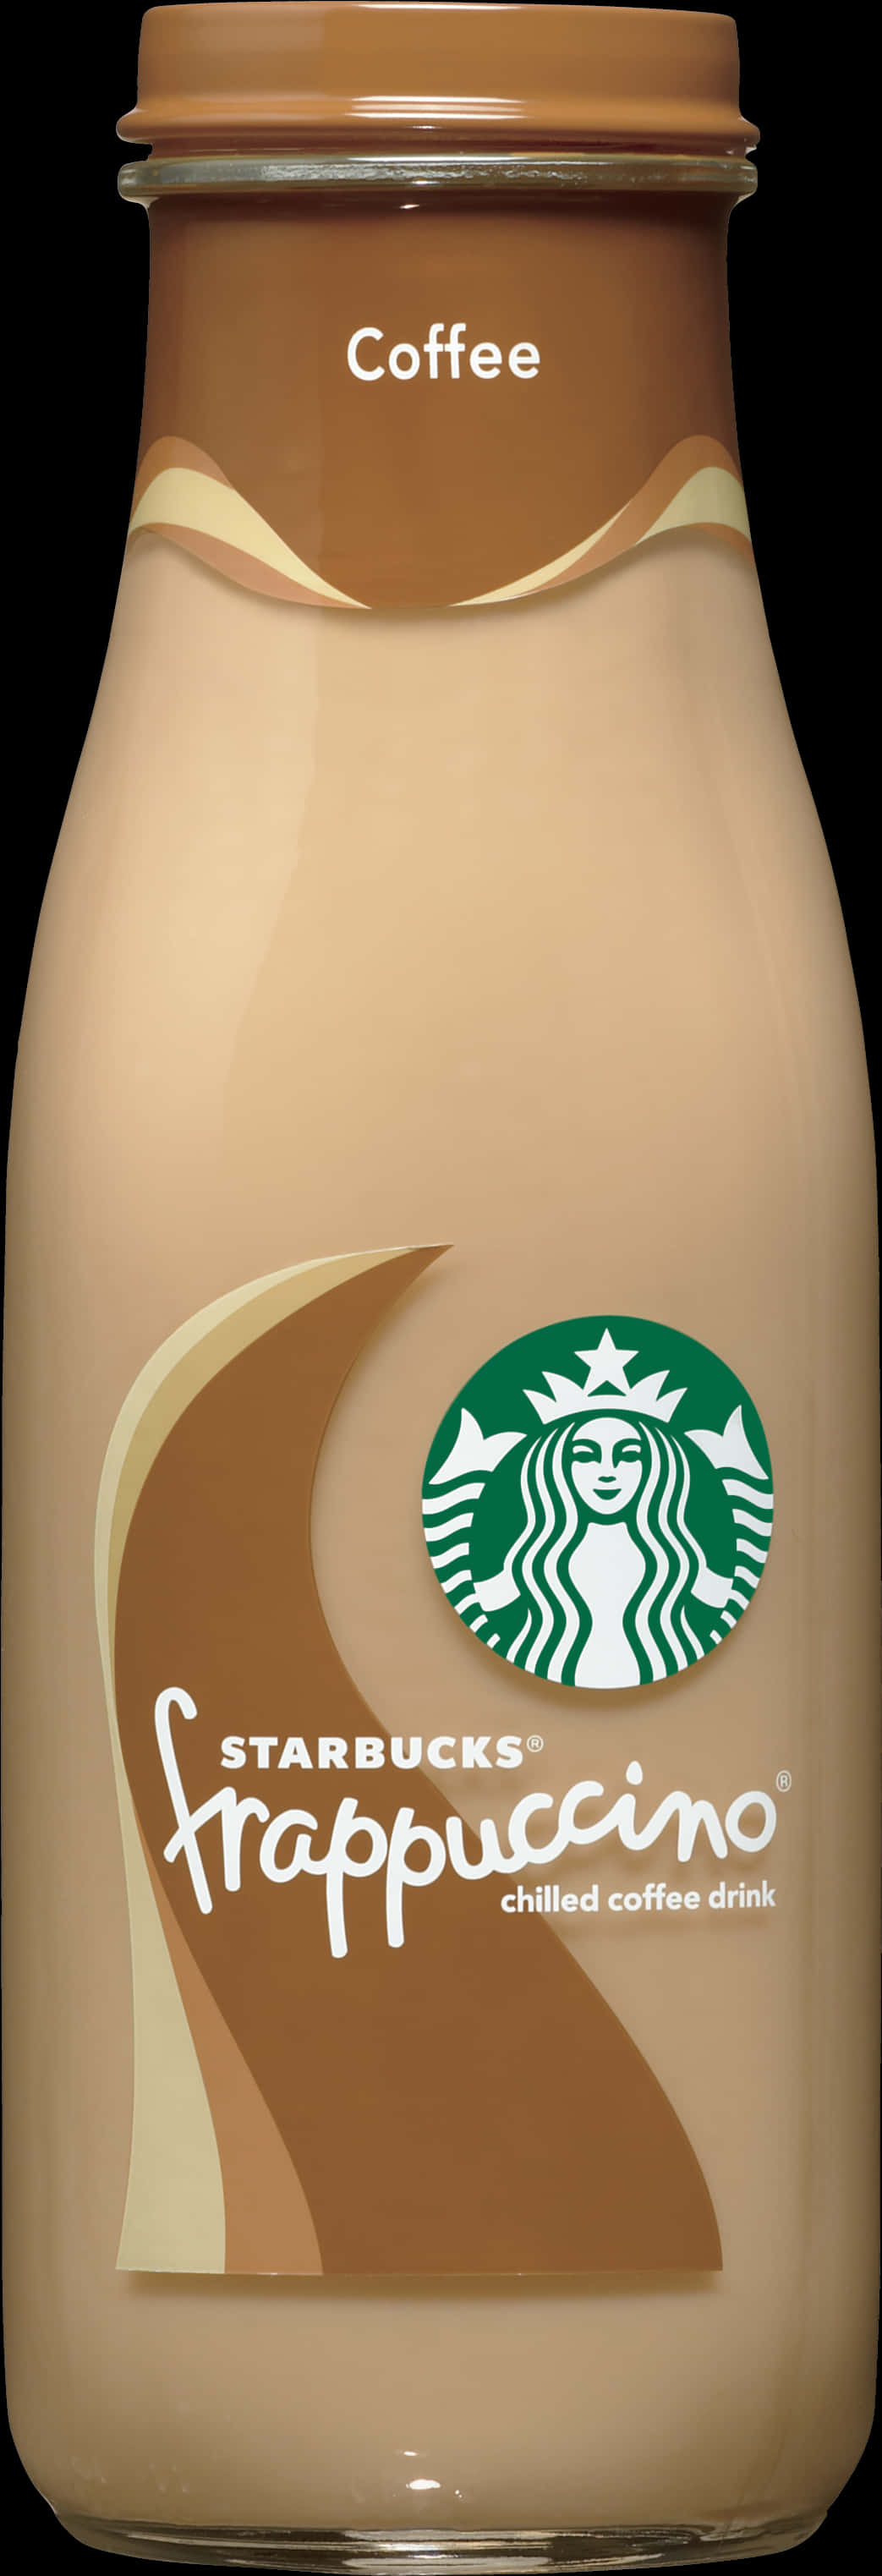 A Close-up Of A Bottle Of Coffee